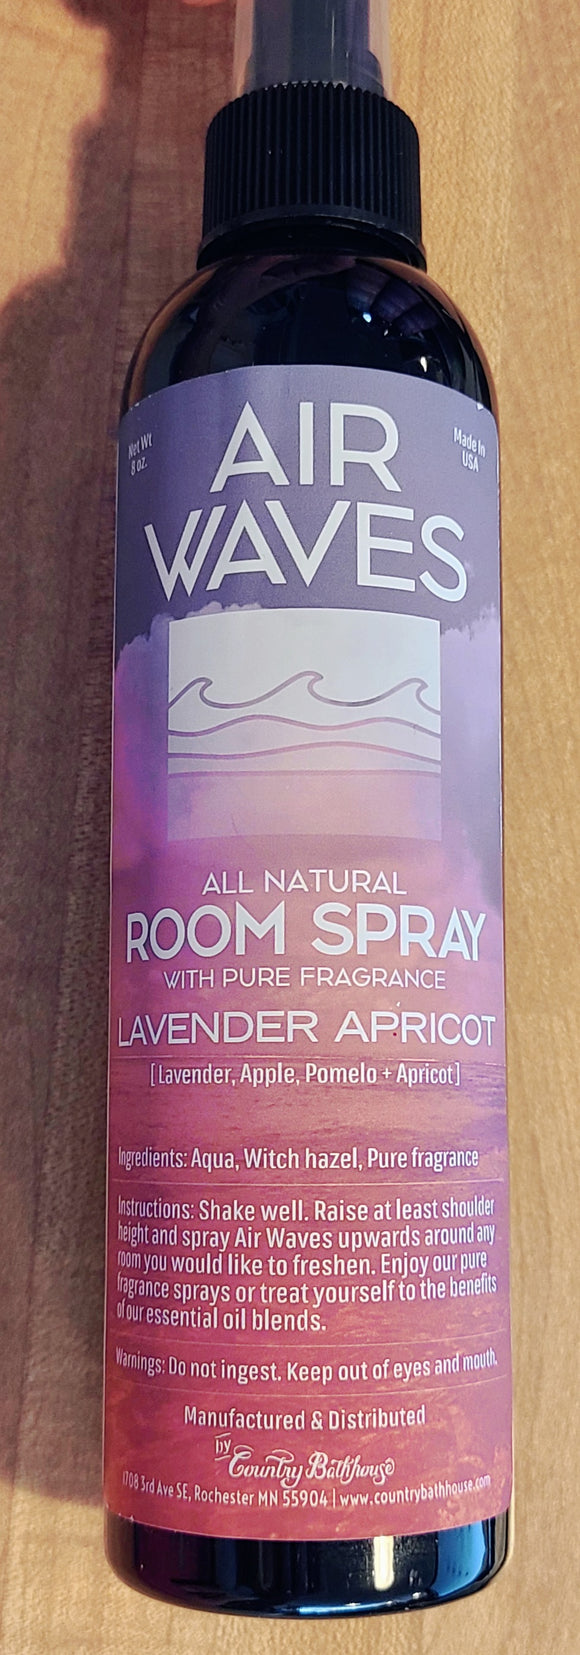 Air waves room spray lavender apricot scented